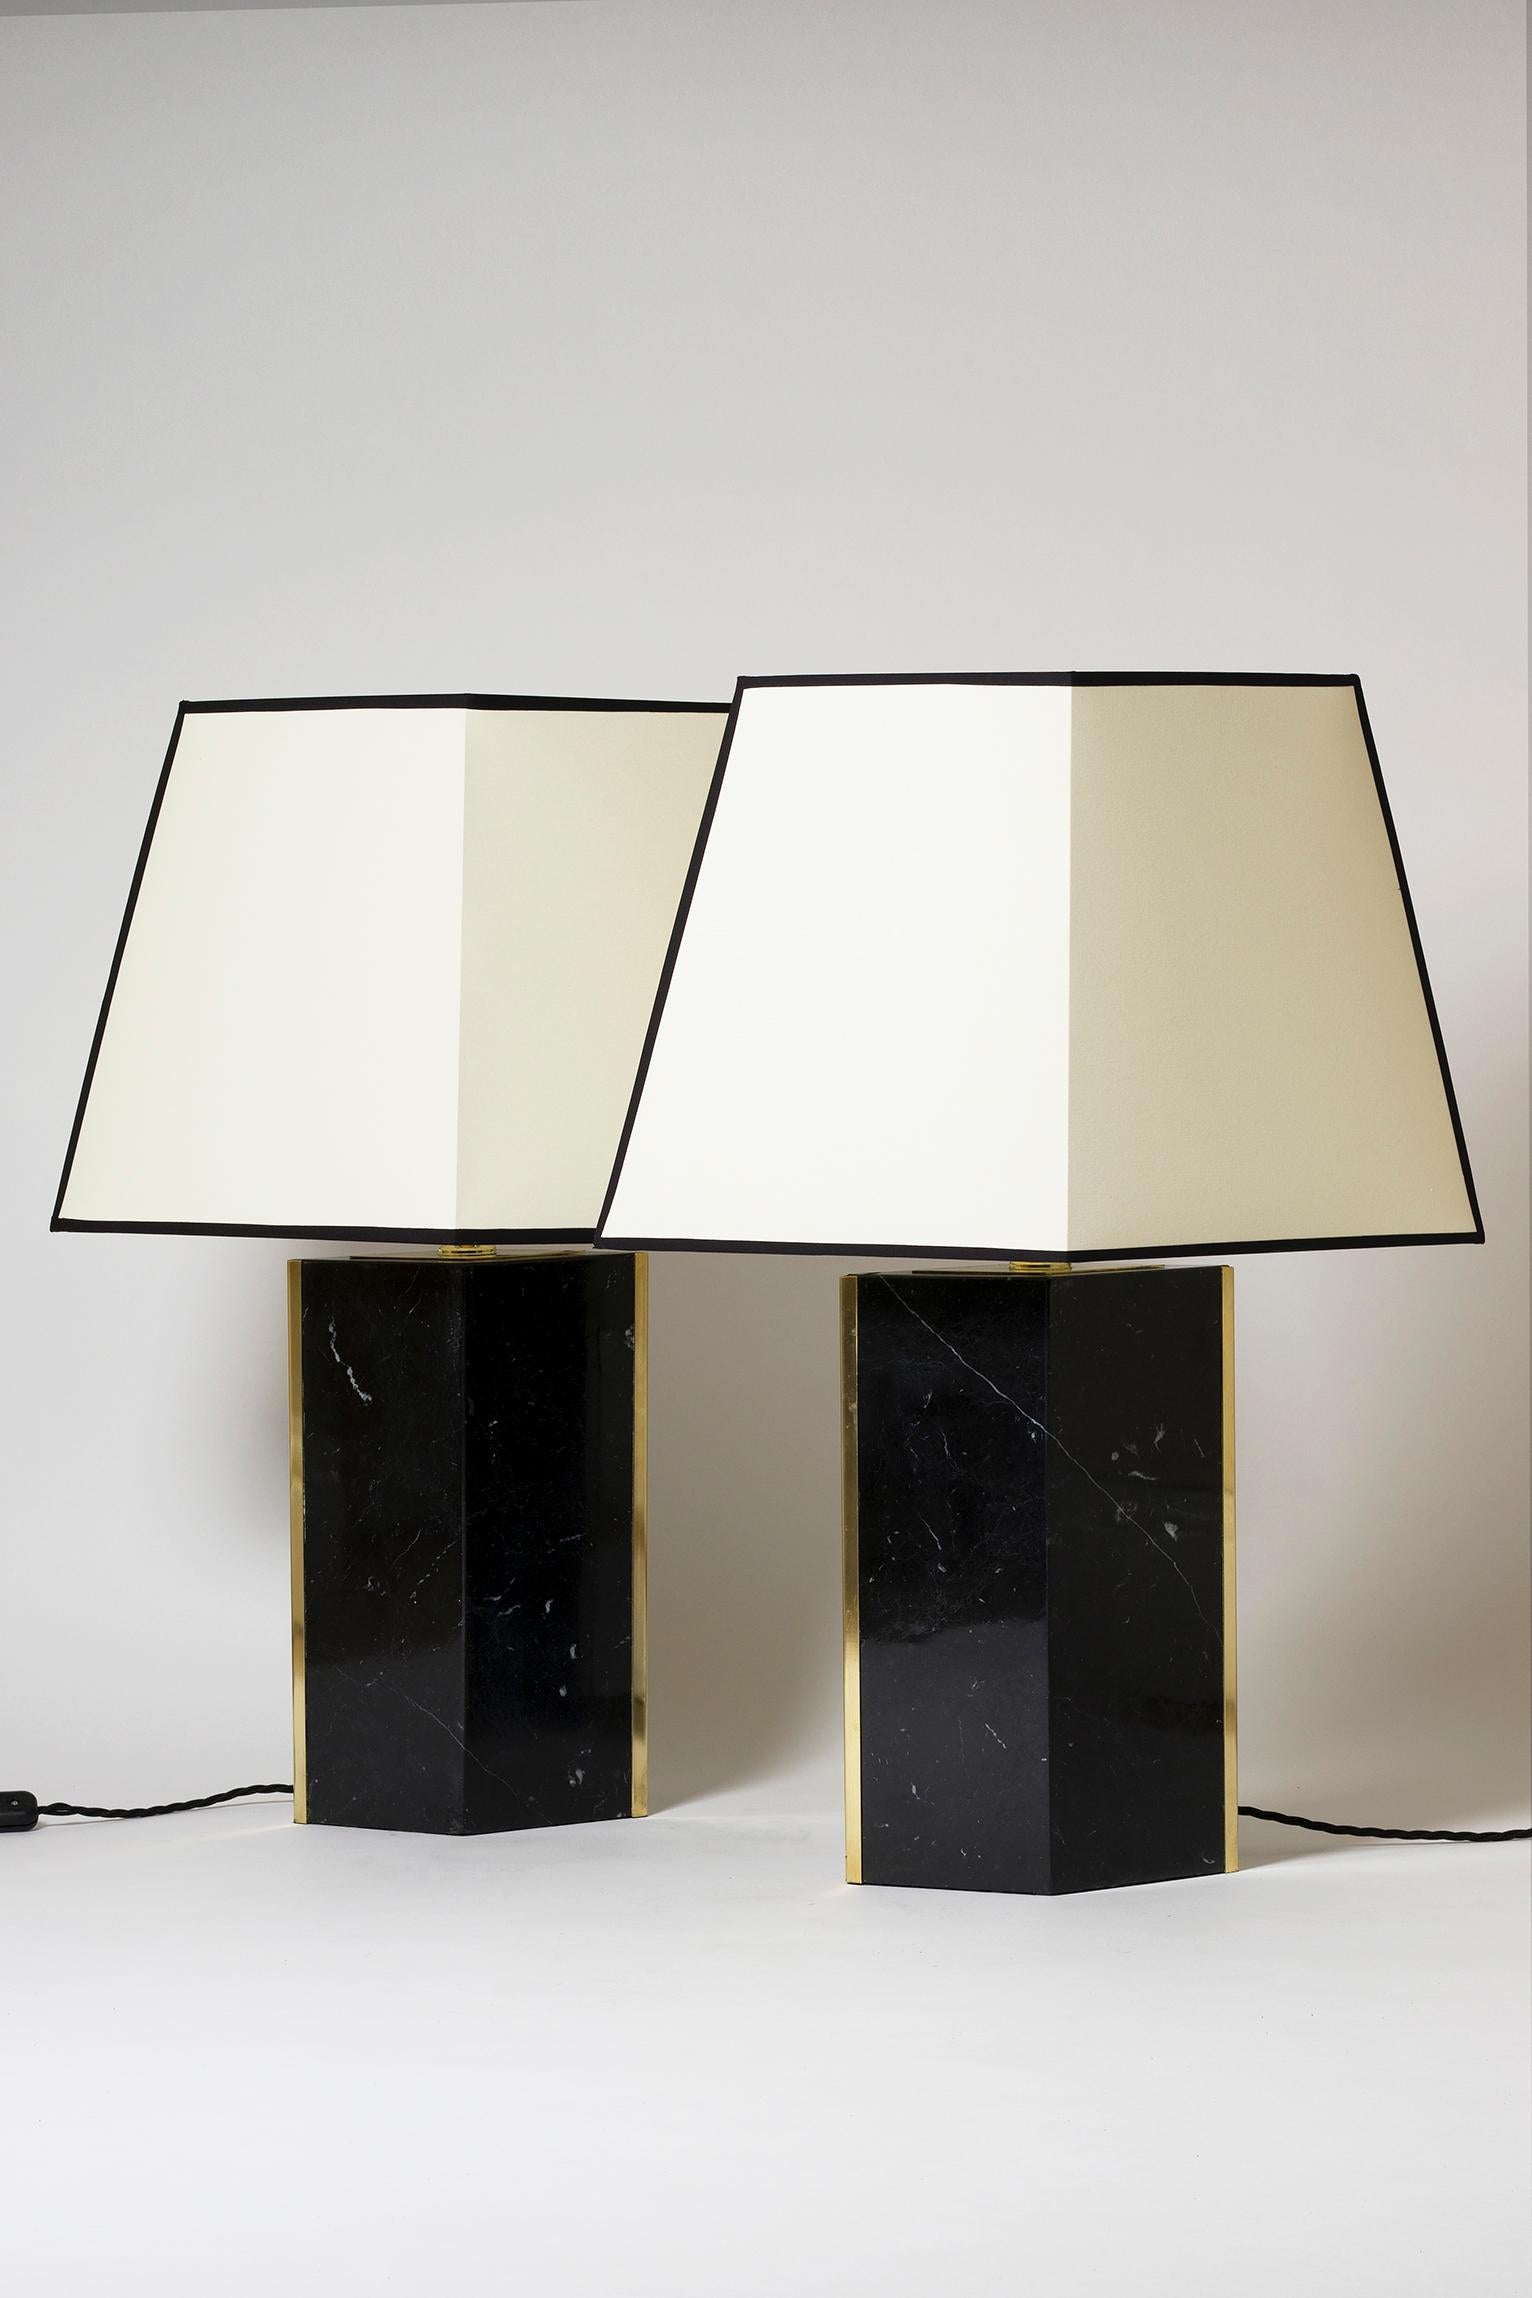 The 'Marine' table lamp, by Dorian Caffot de Fawes.
Limited Edition of 6 singles lamps. 
Solid Nero Marquina black marble carried in Italy, with brass mounts and bespoke diamond shaped shades (handmade in the UK)
With the shade: 67 cm high by 49